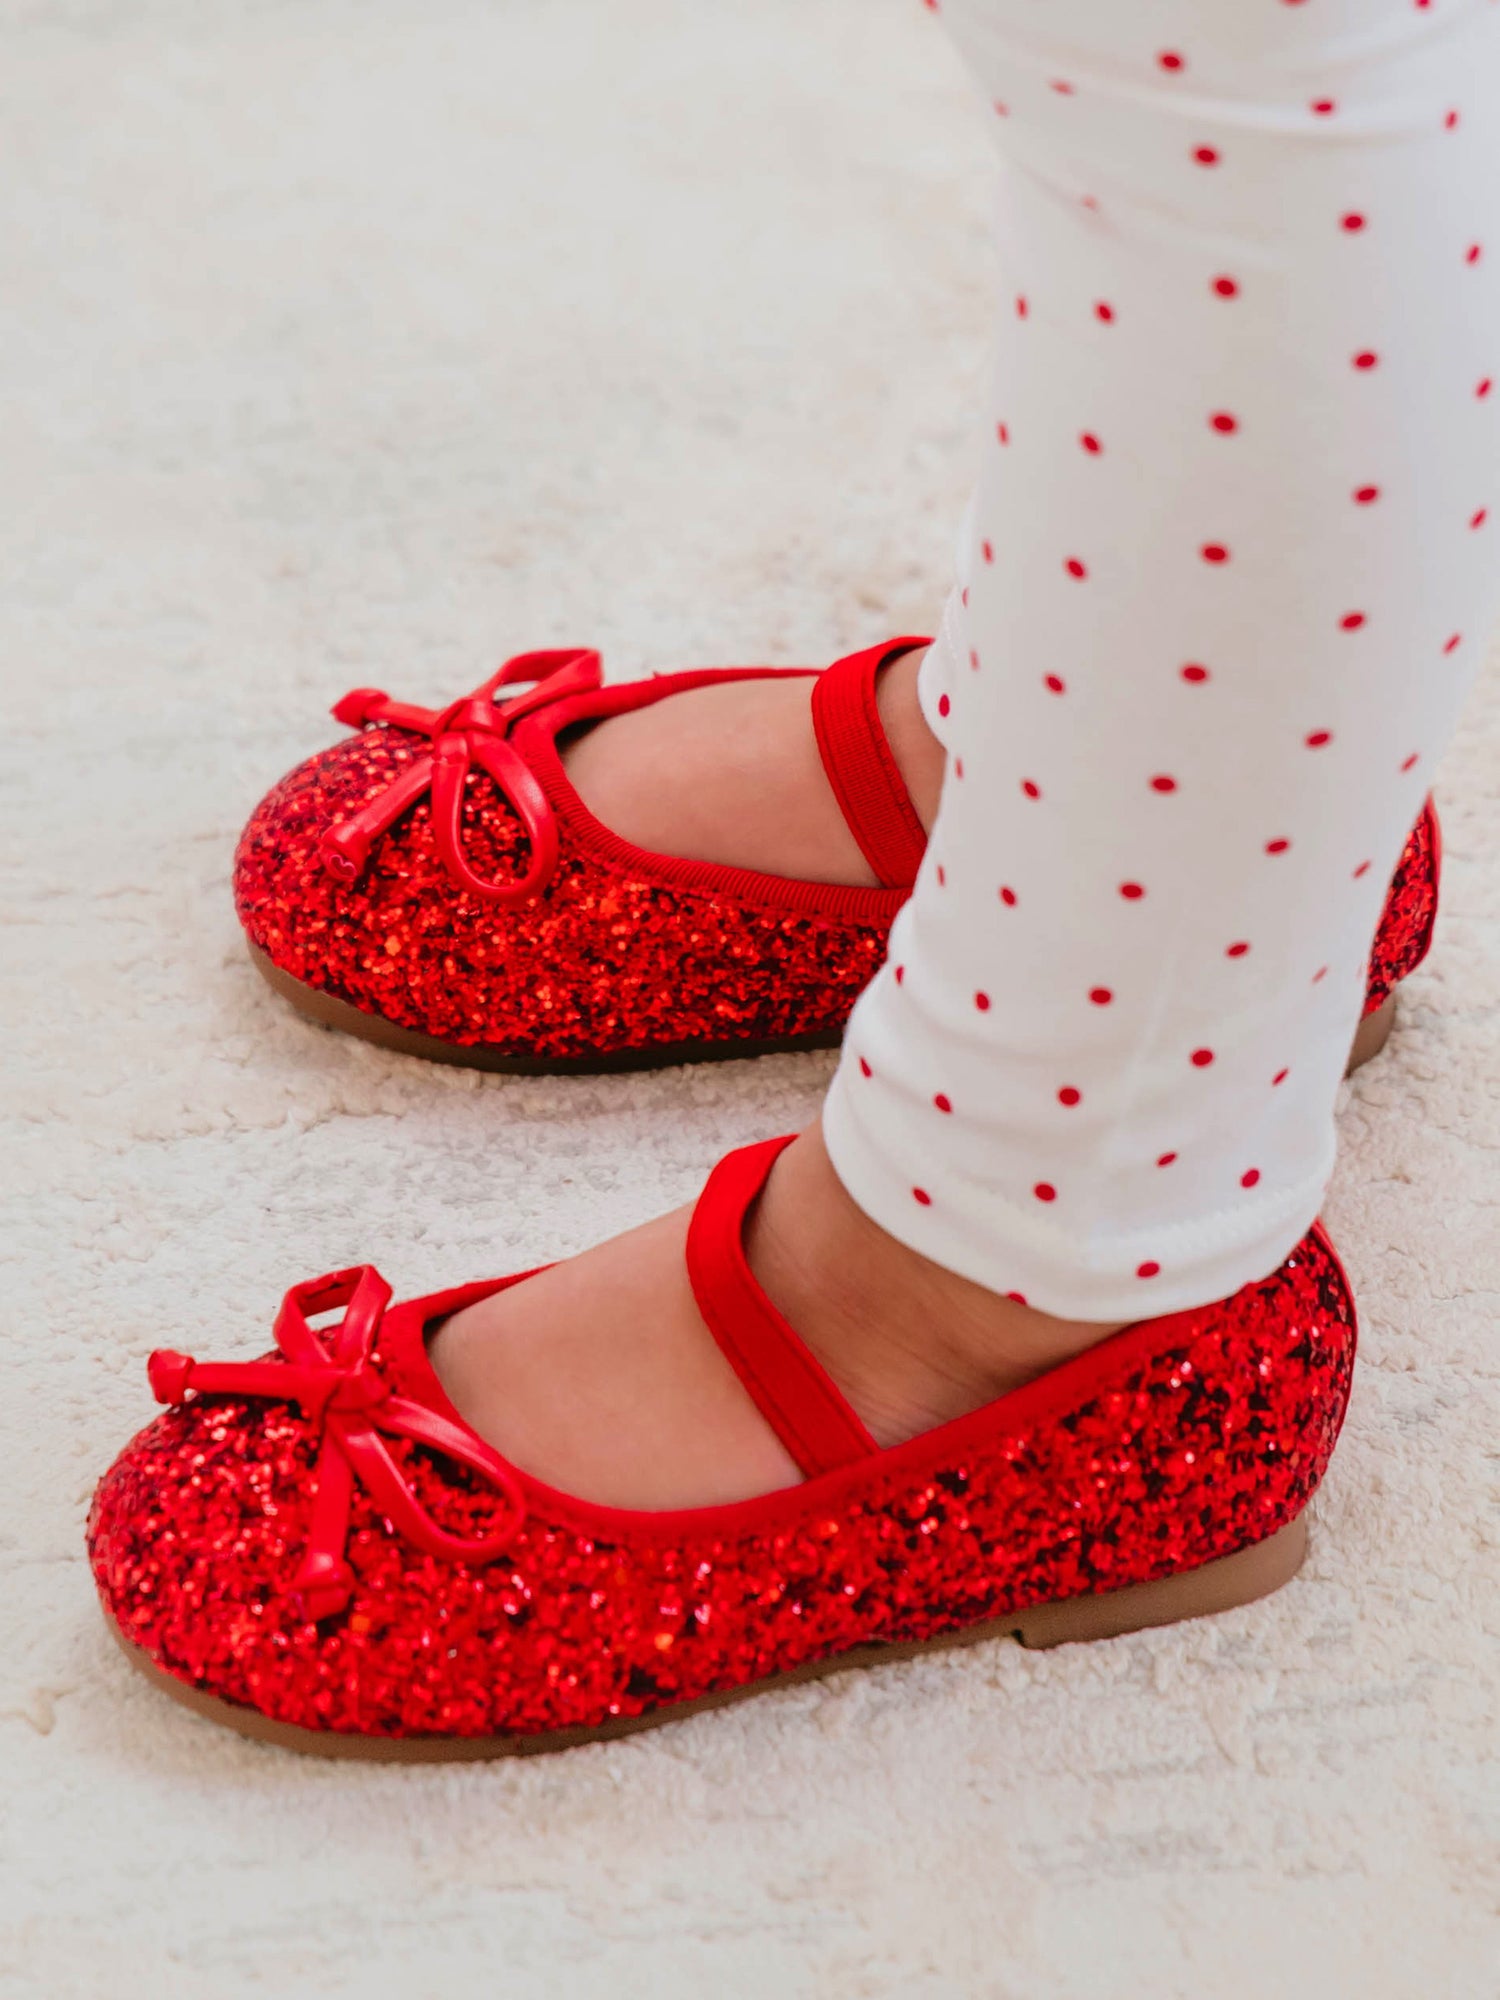 These Small Bow Glitter Ballet shoes come in red with an elastic strap across the top of the foot. The red bows bows are attached on top of the shoes’ toe.